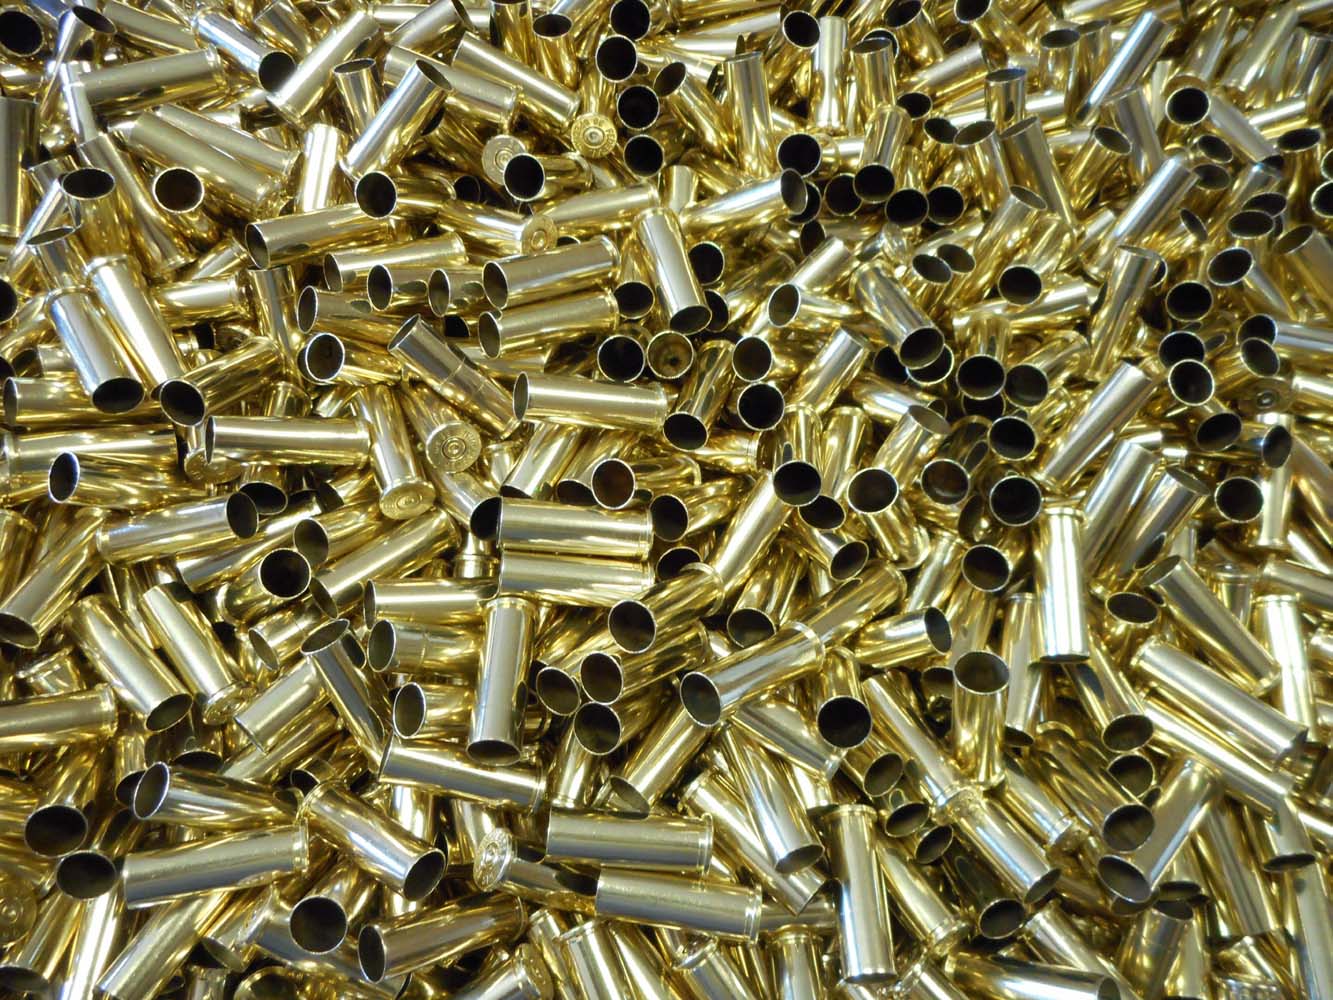 New Brass vs. Once-Fired Brass - What's the Difference? – Top